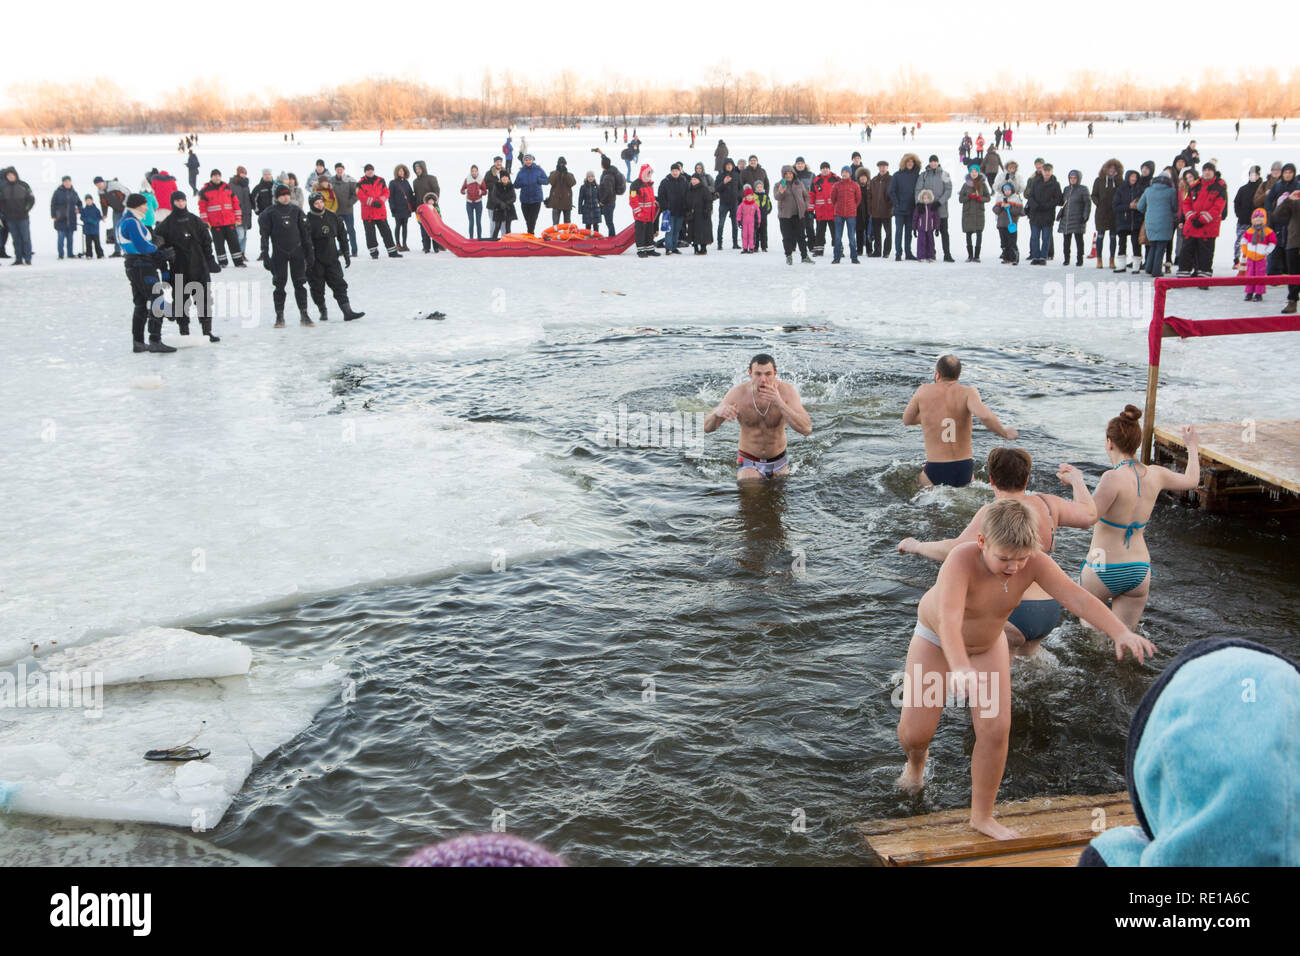 Boy climbs on wooden steps from chilly water on a freezing winter day 19 January -  Jesus Water Baptism in Kiev - as others enter the chilly water Stock Photo